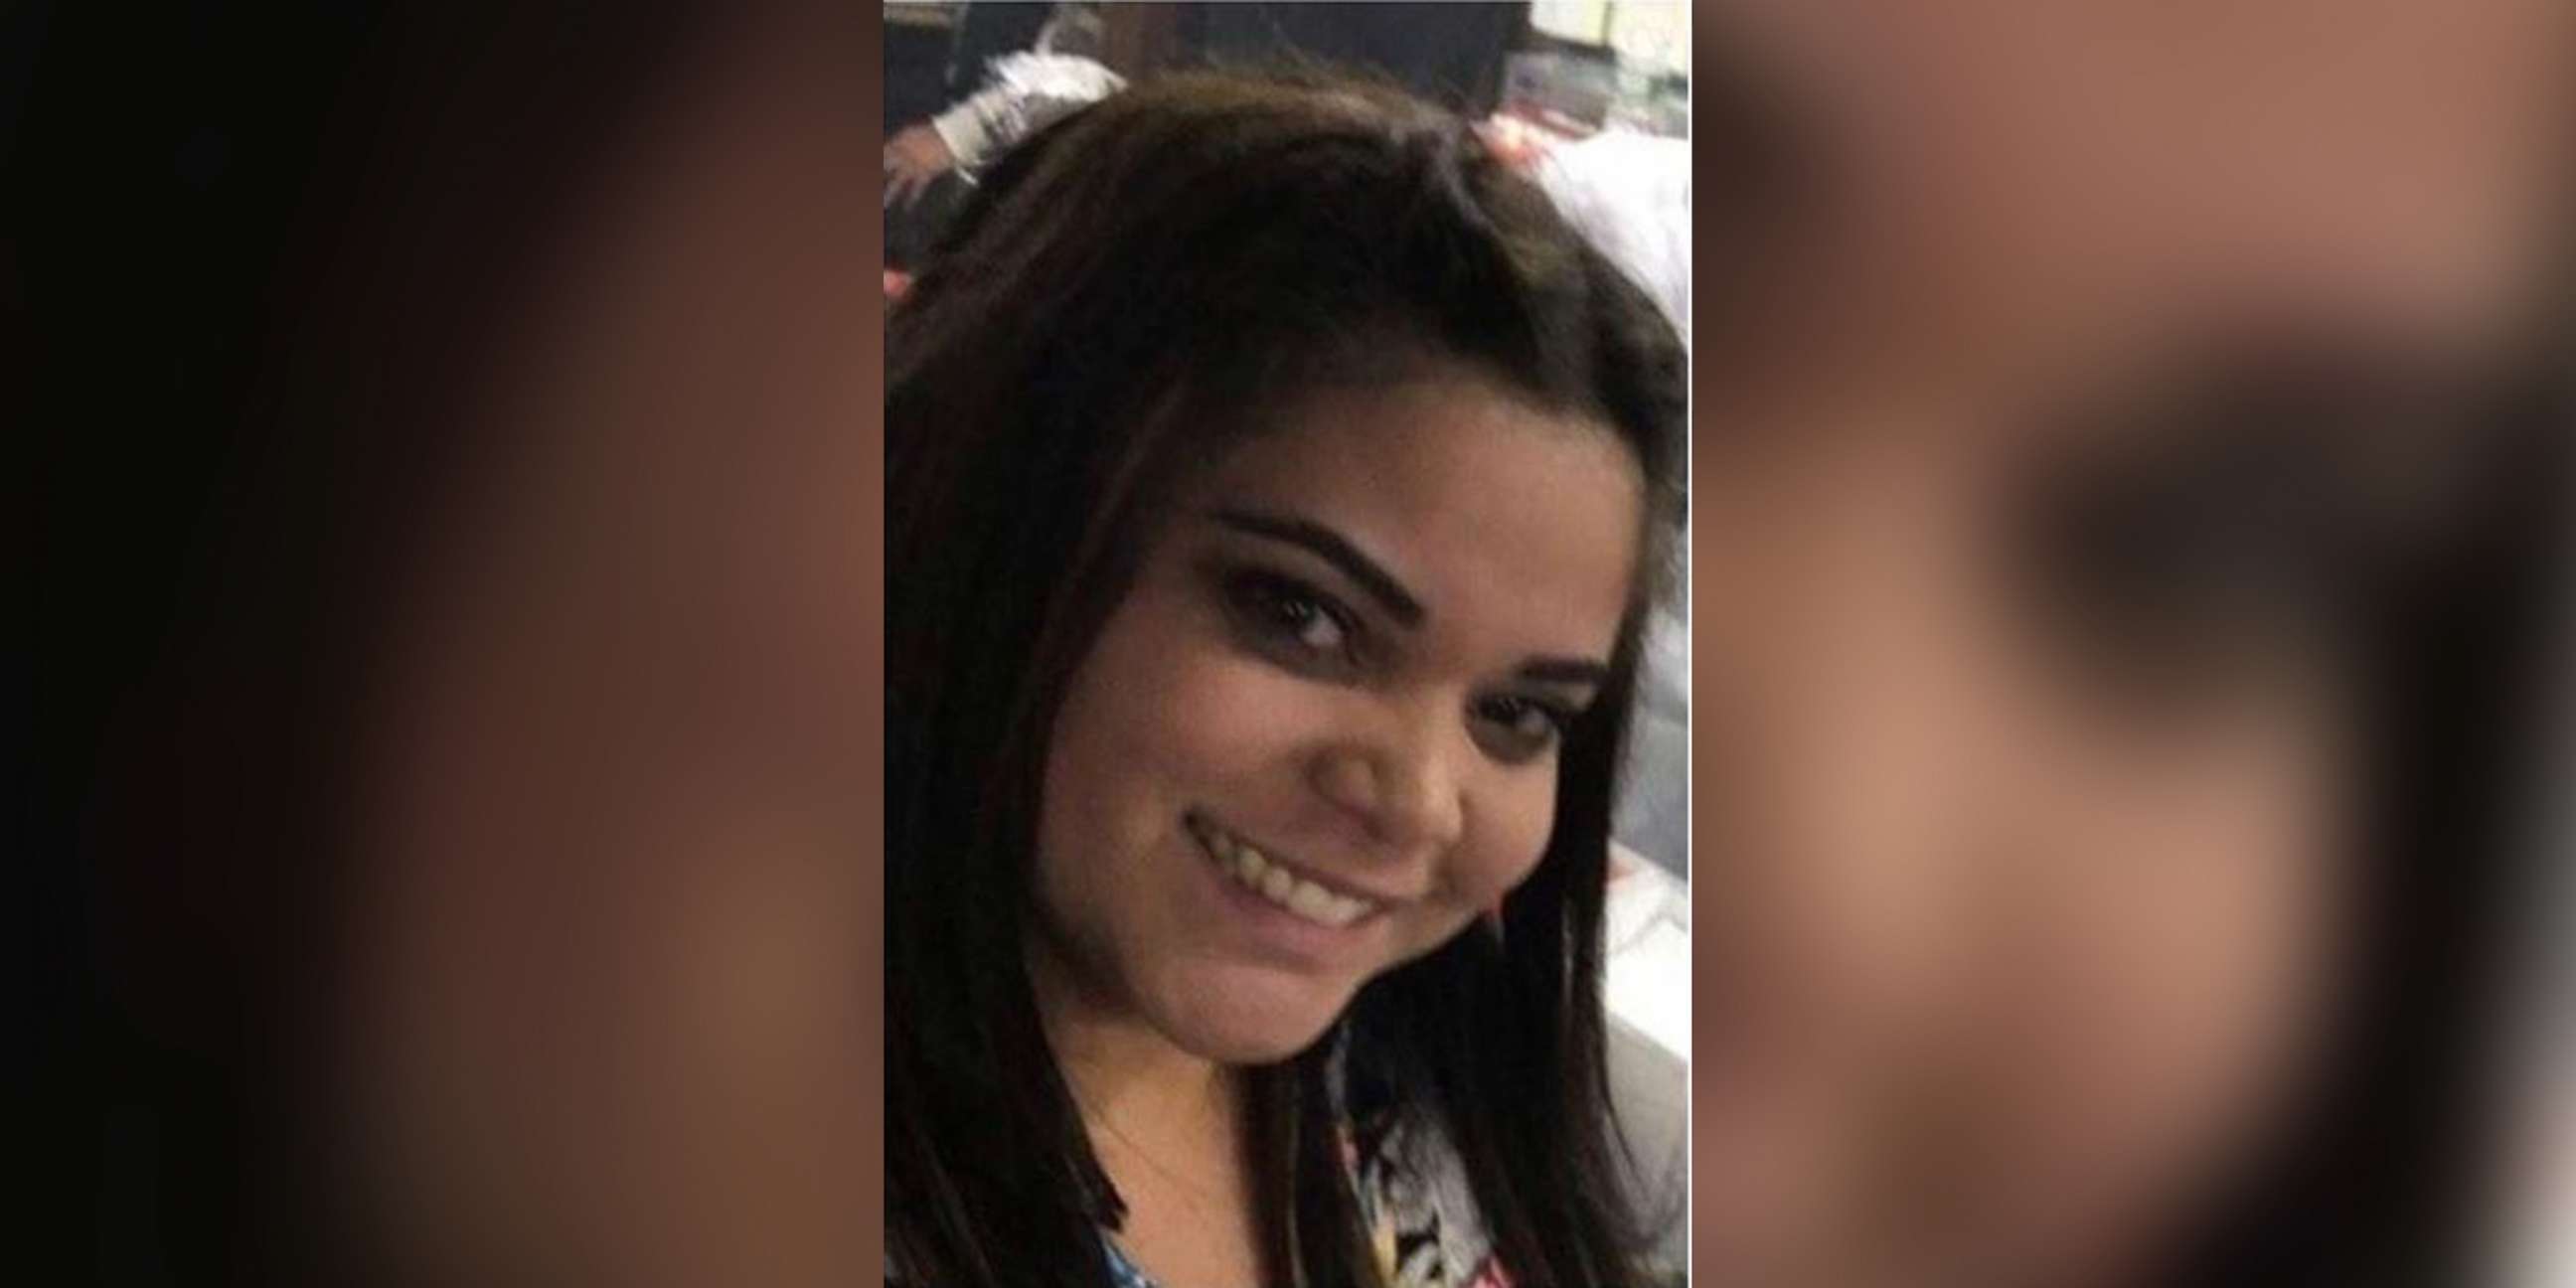 PHOTO: Waterbury police say Janet Avalo-Alvarez's body was found in Wolcott, Conn., on Nov. 19, 2019, a few miles from where she was last seen.